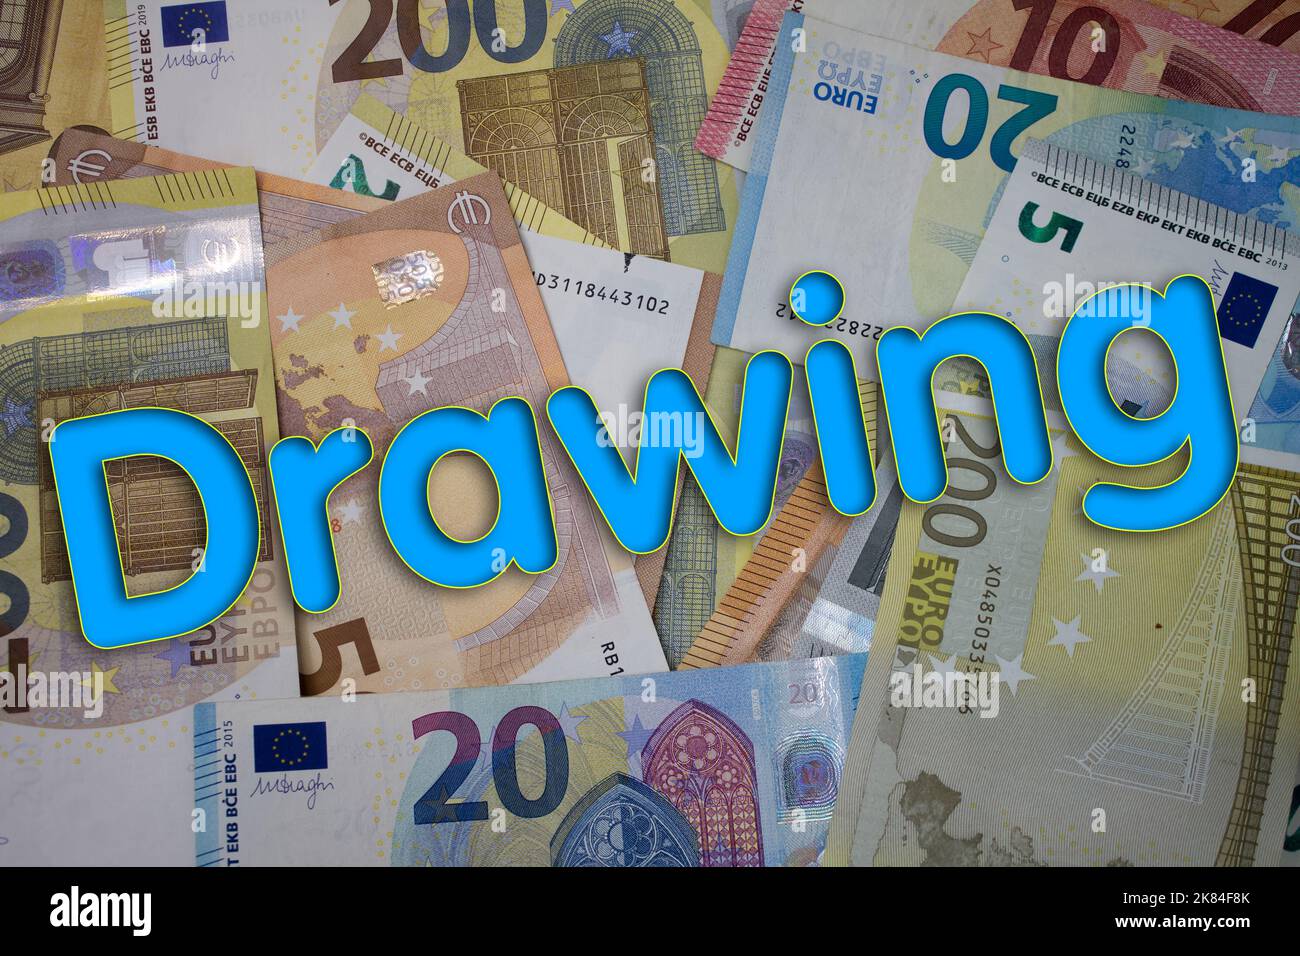 Drawing word with money. Paper currency background with different banknotes. Stock Photo